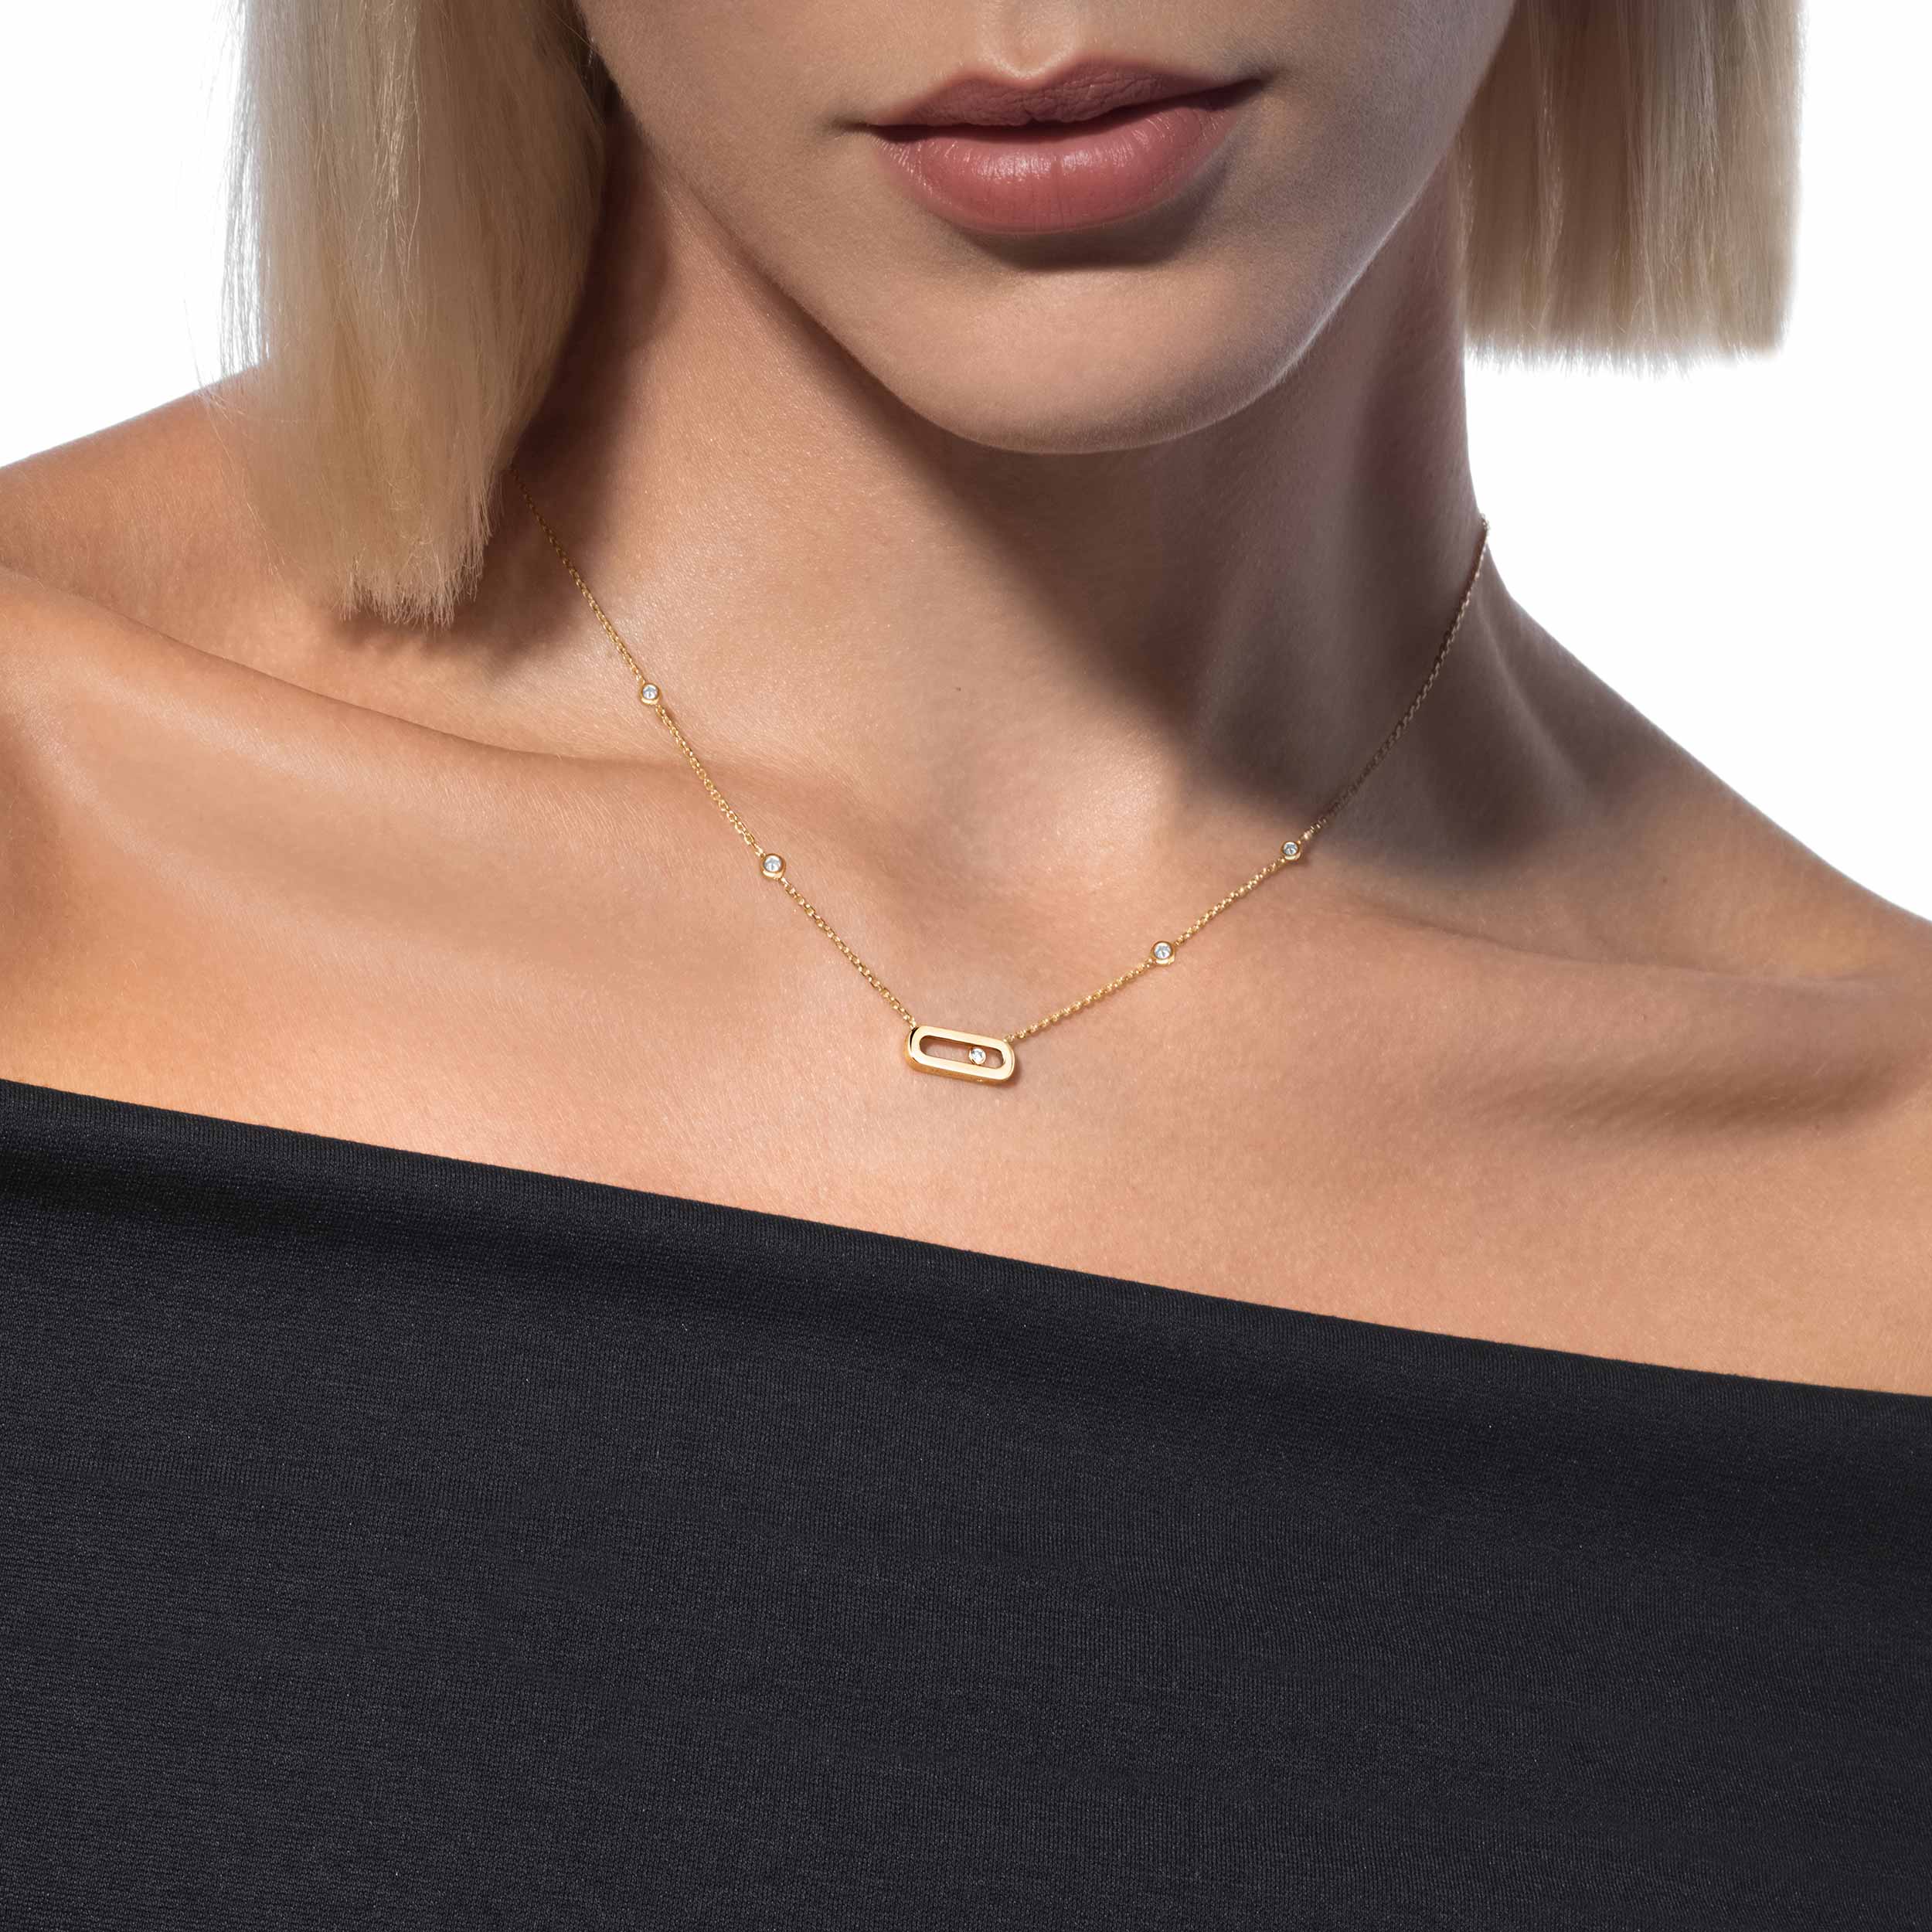 Necklace For Her Yellow Gold Diamond Gold Move Uno 10053-YG